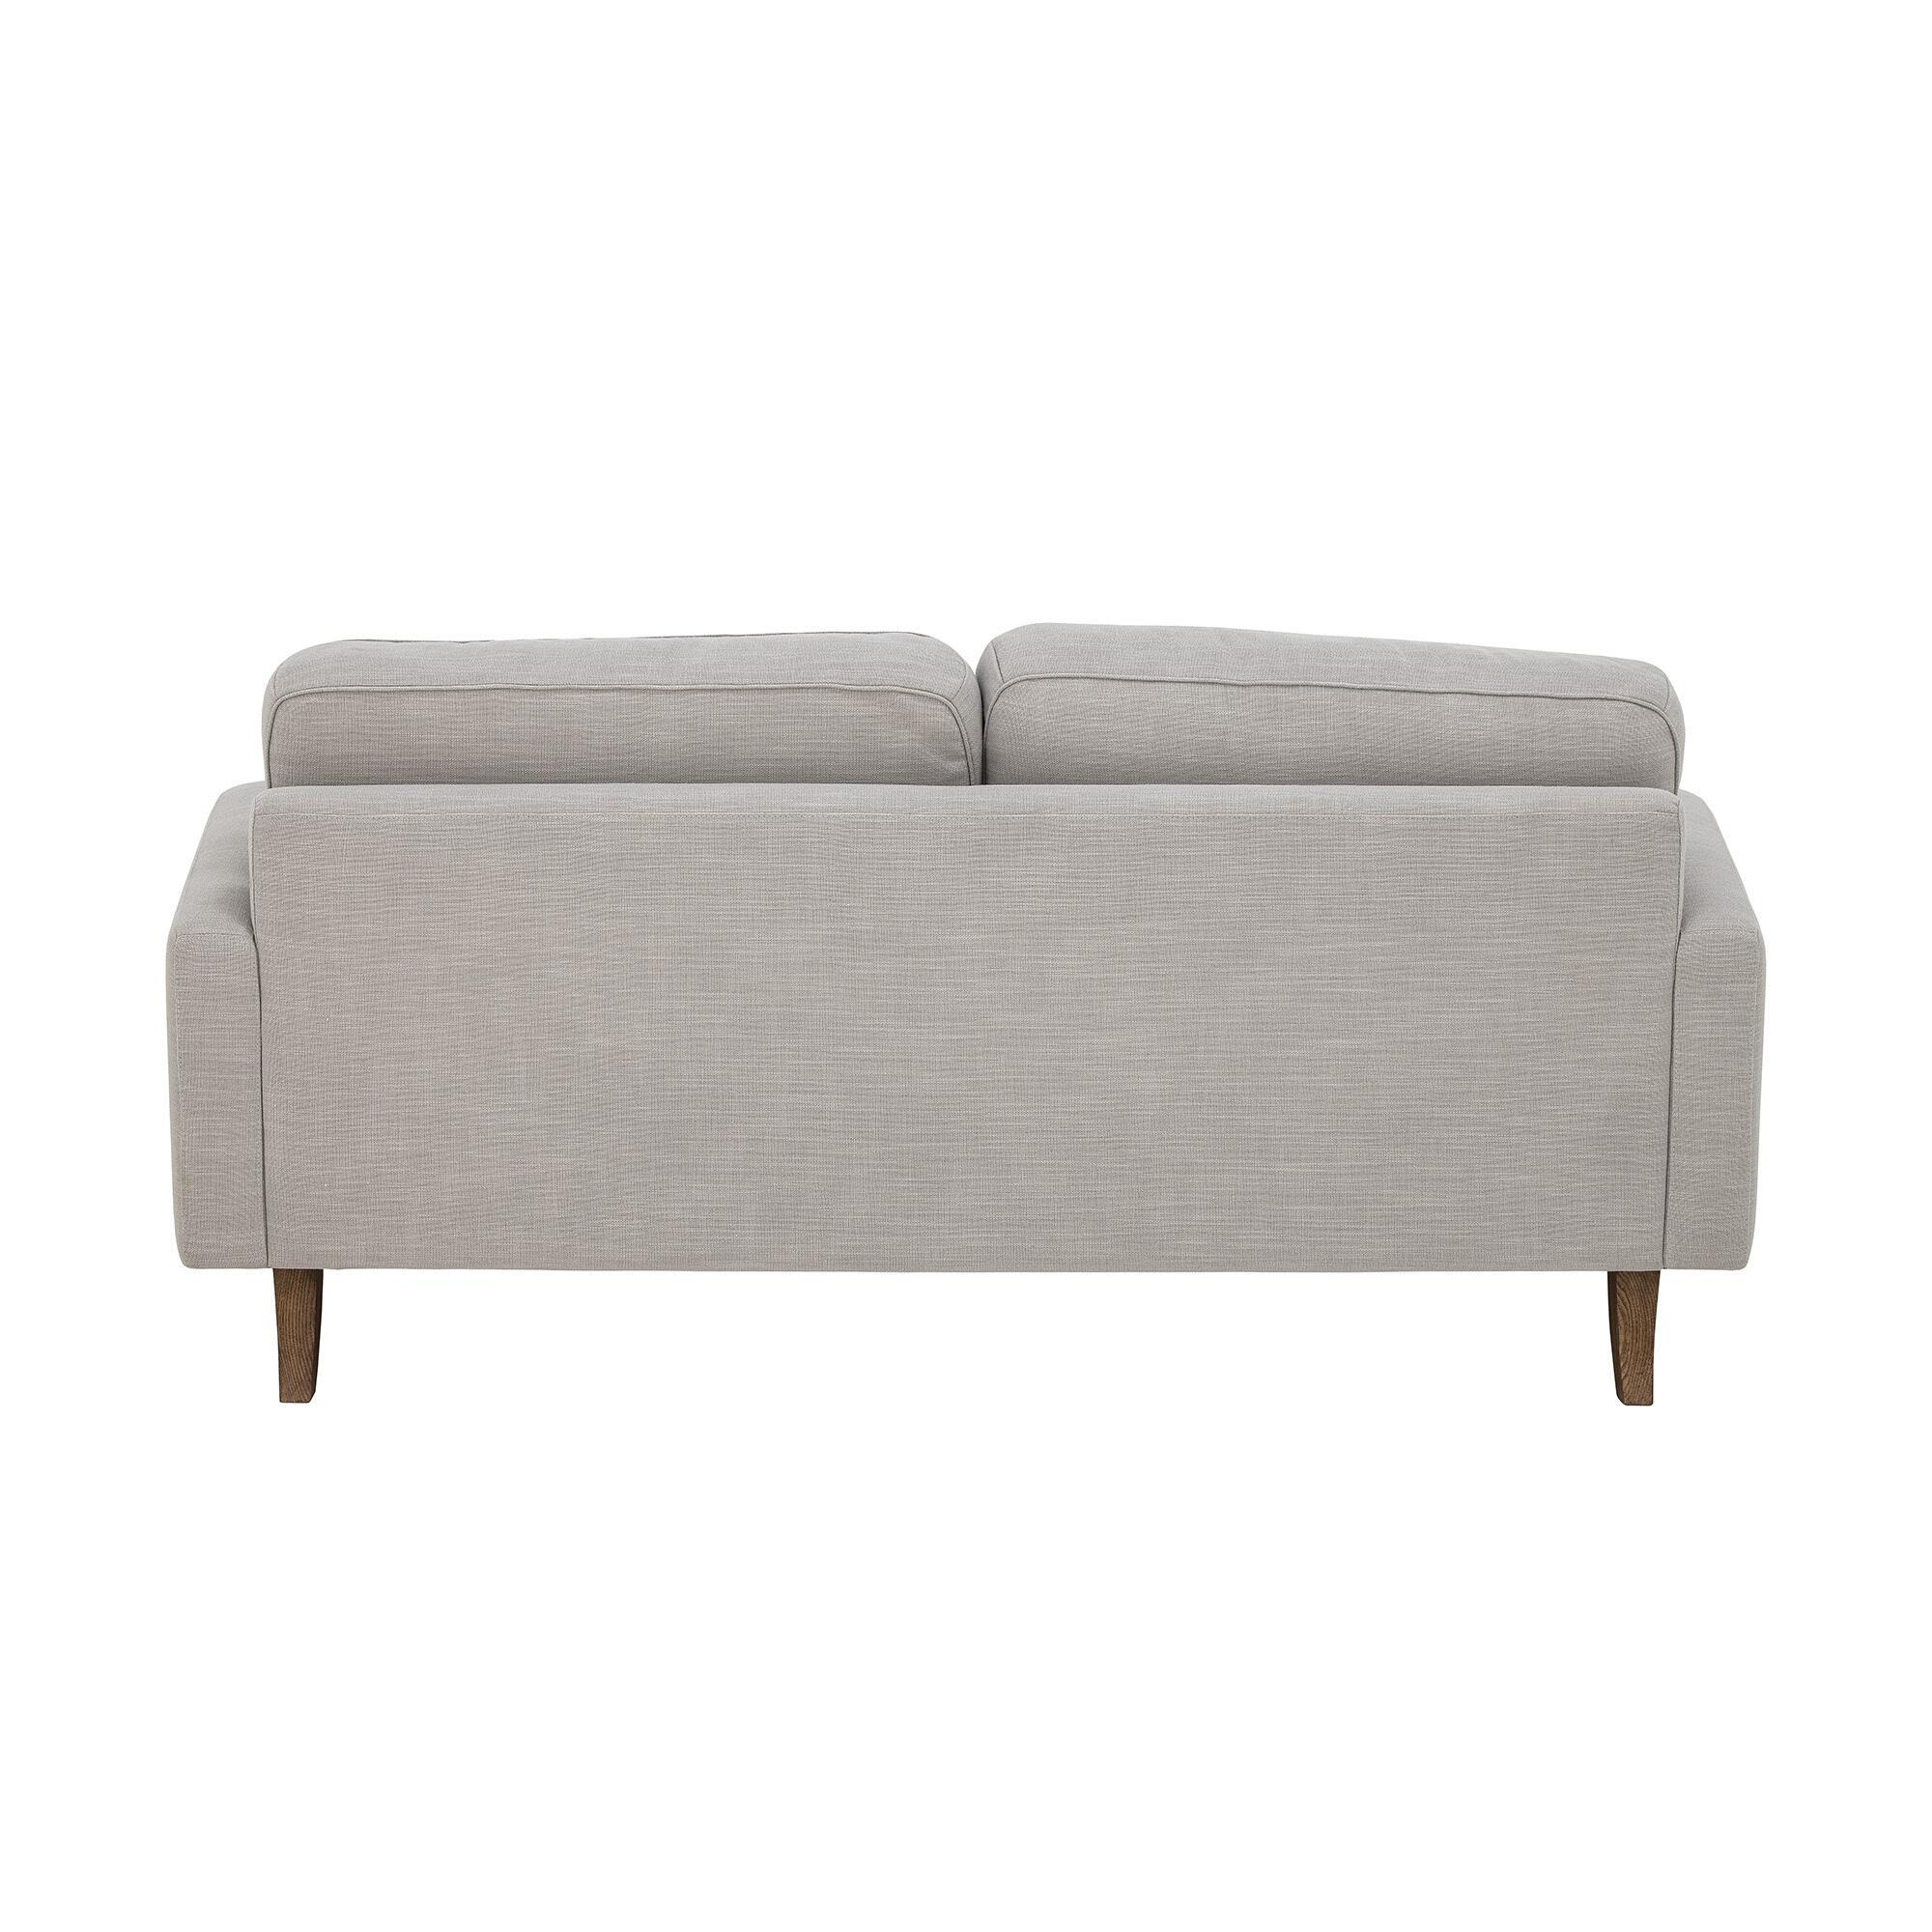  Augusta Sofa - Natur fra Creative Collection by Bloomingville i Polyester (Varenr: 82064255)